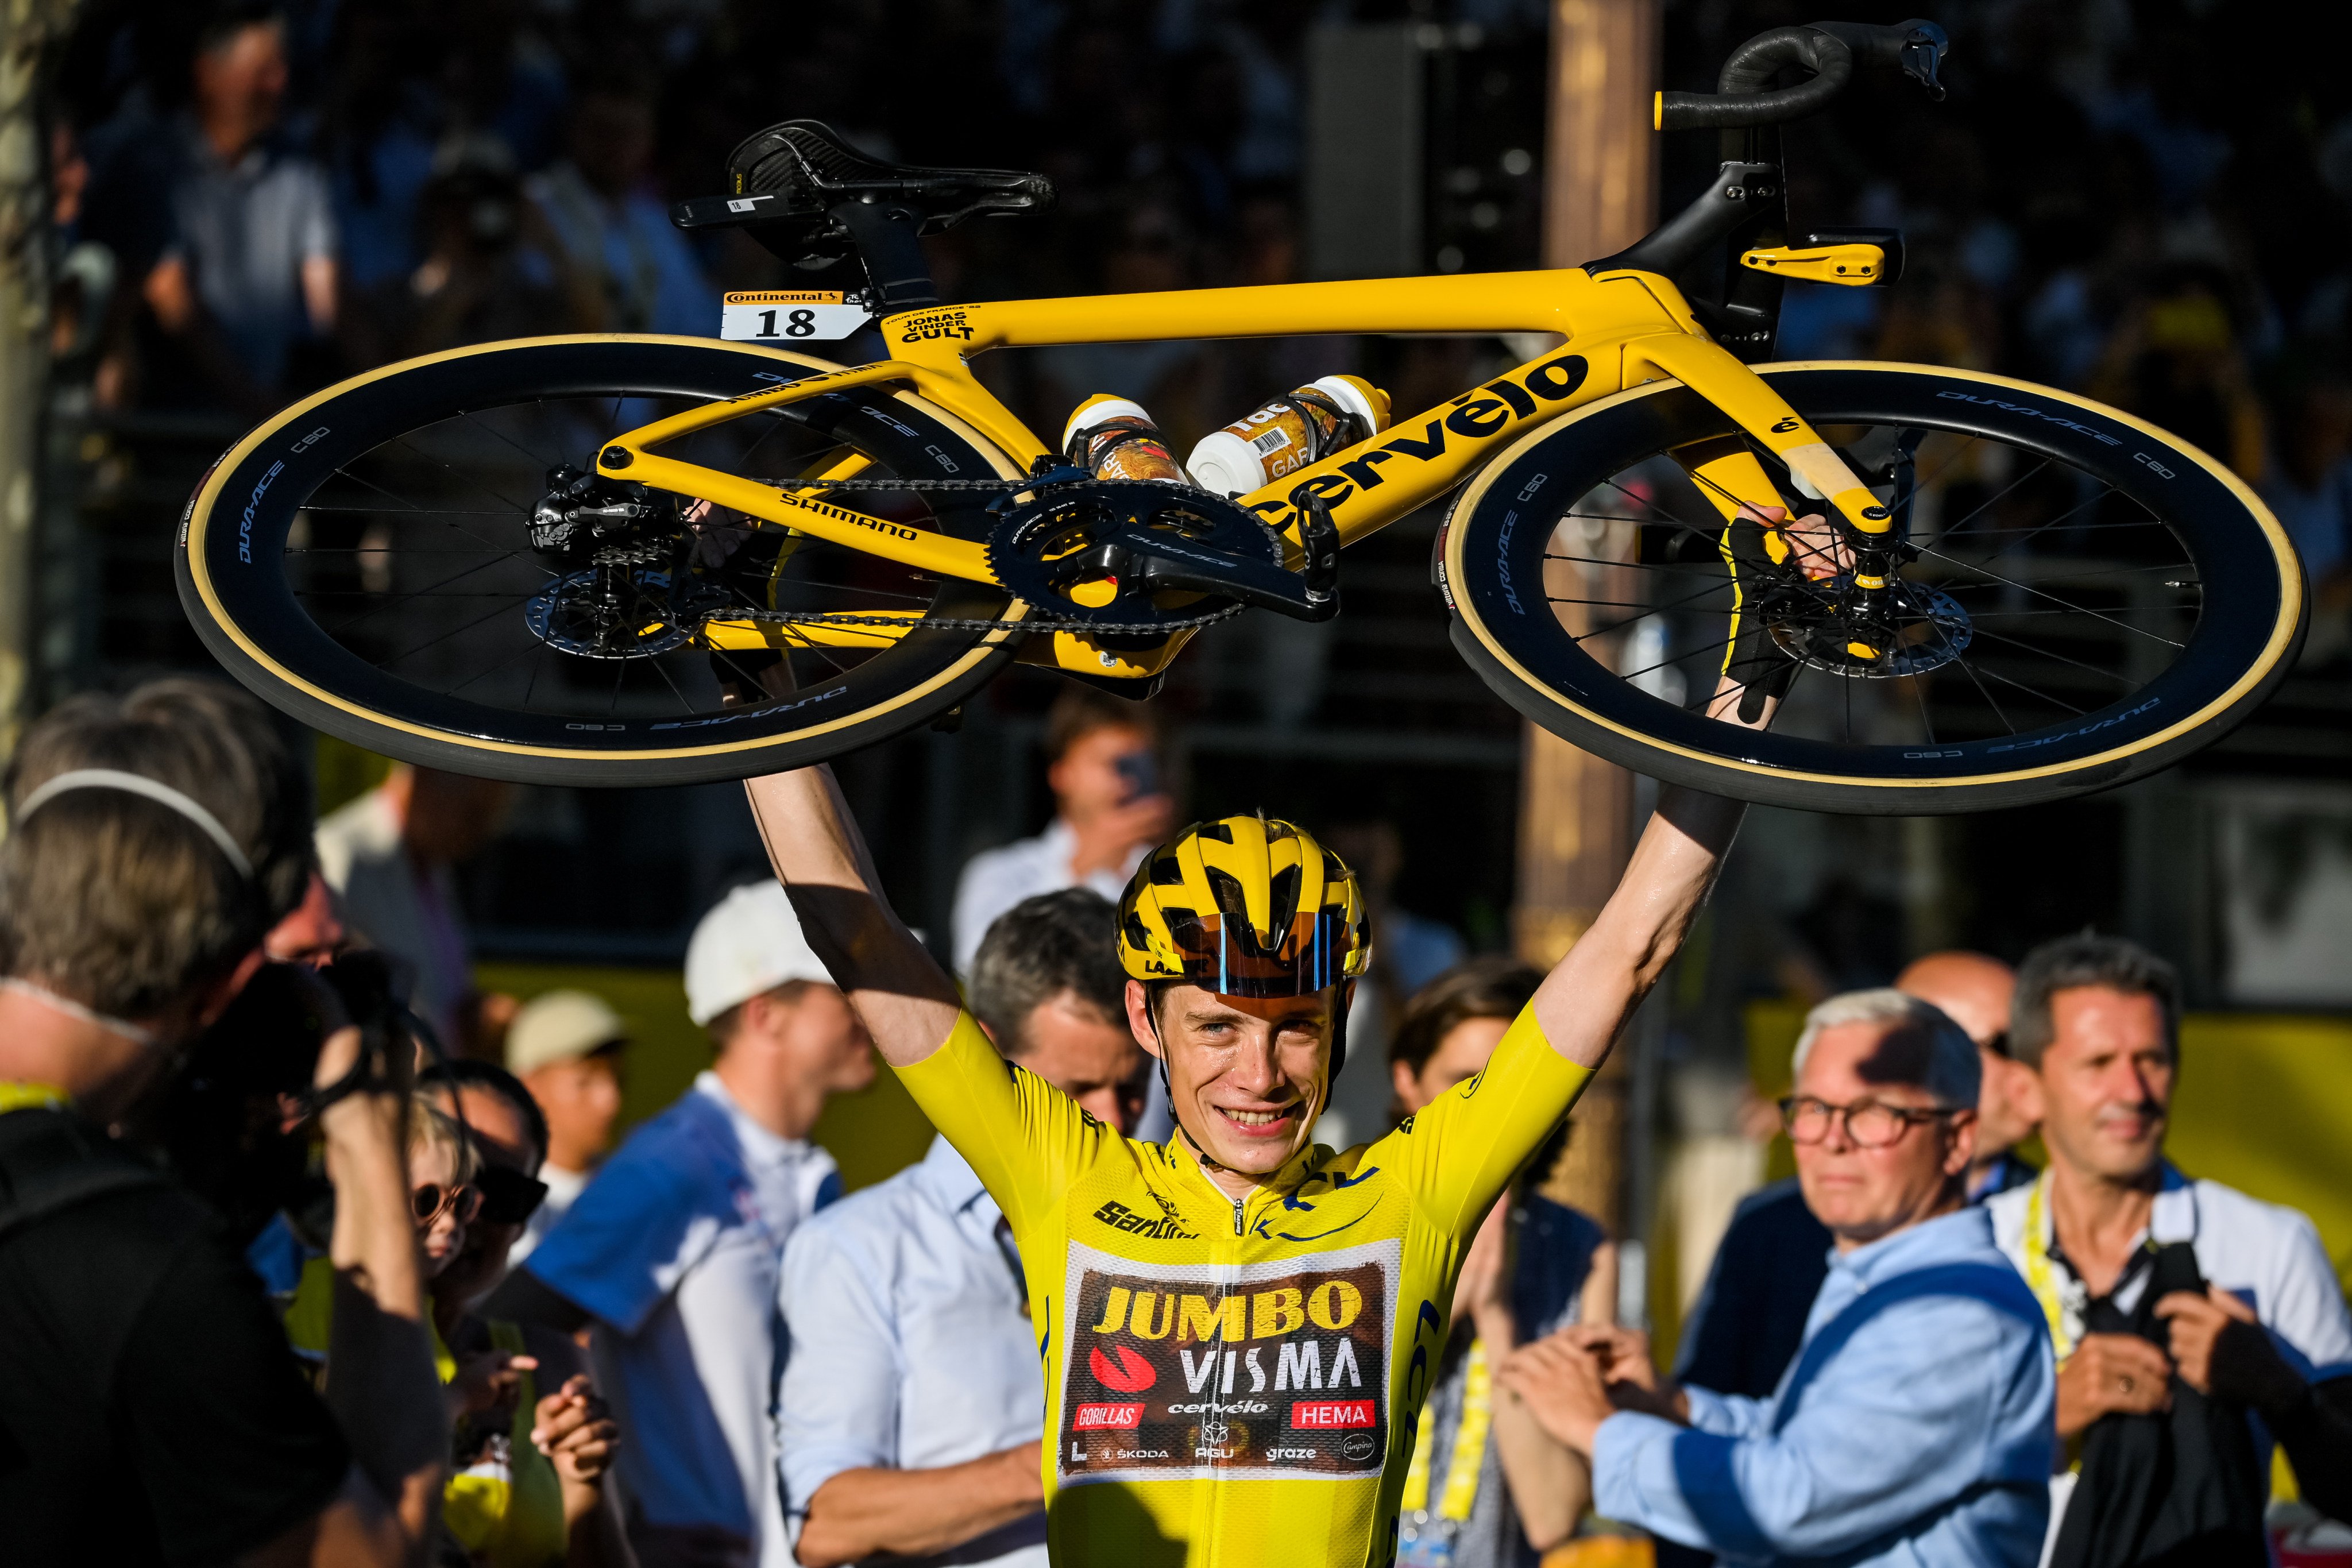 Danish rider Jonas Vingegaard raises his bicycle as he celebrates winning the 109th edition of the Tour de France cycling race in Paris, France on Sunday. Photo: dpa